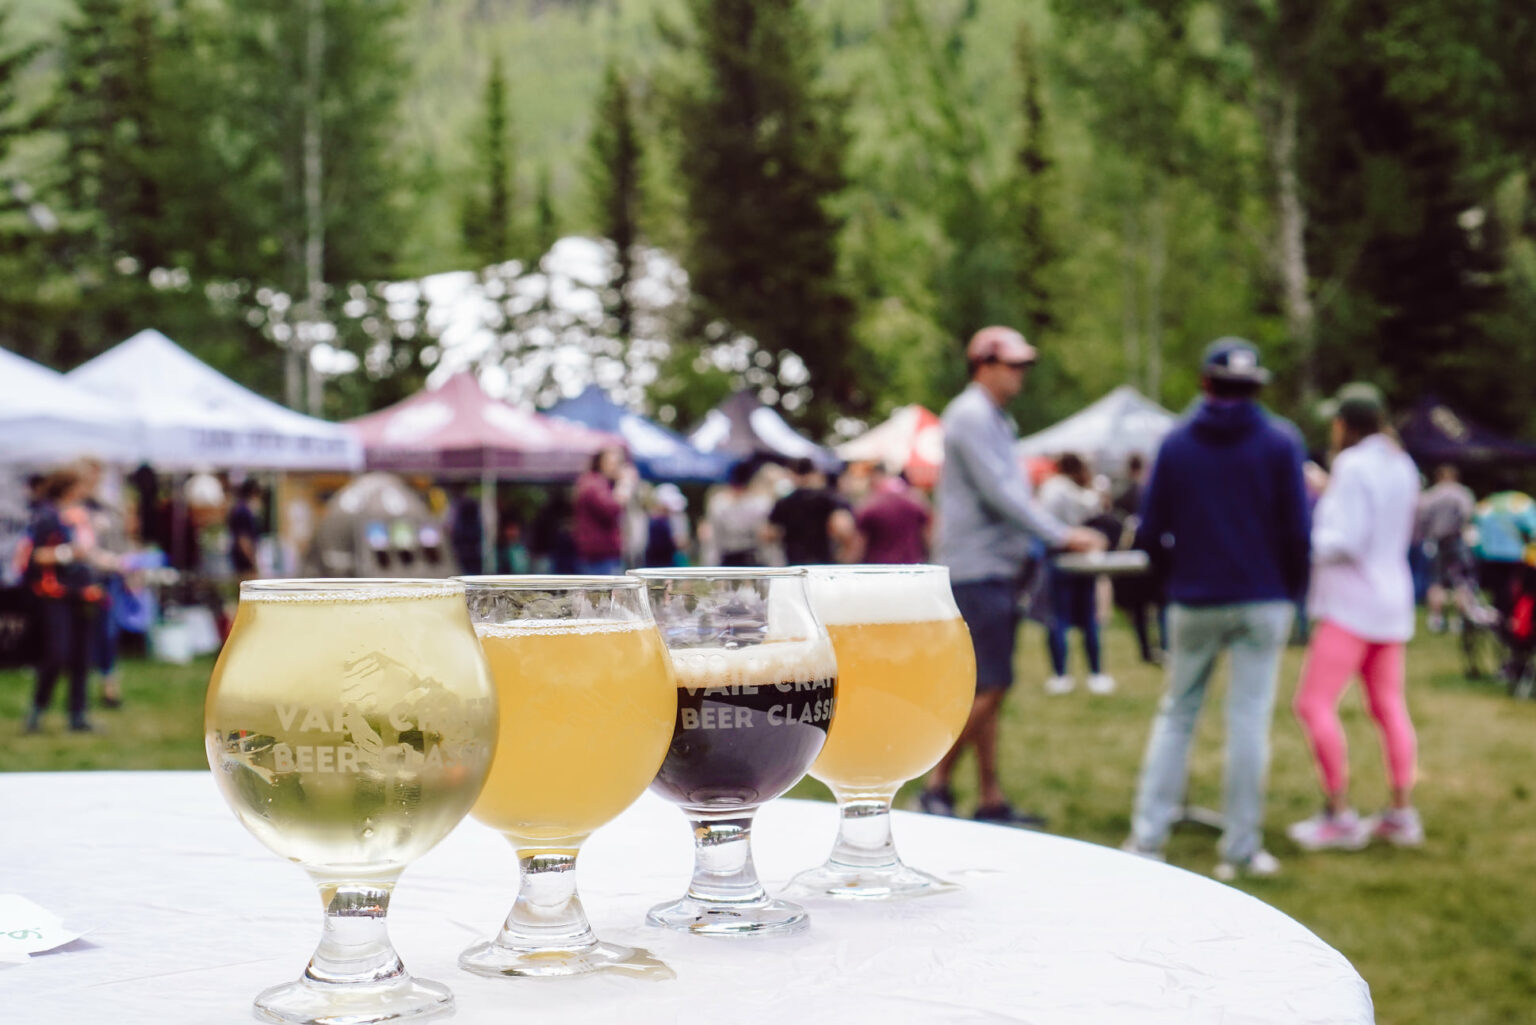 Home Vail Craft Beer Classic